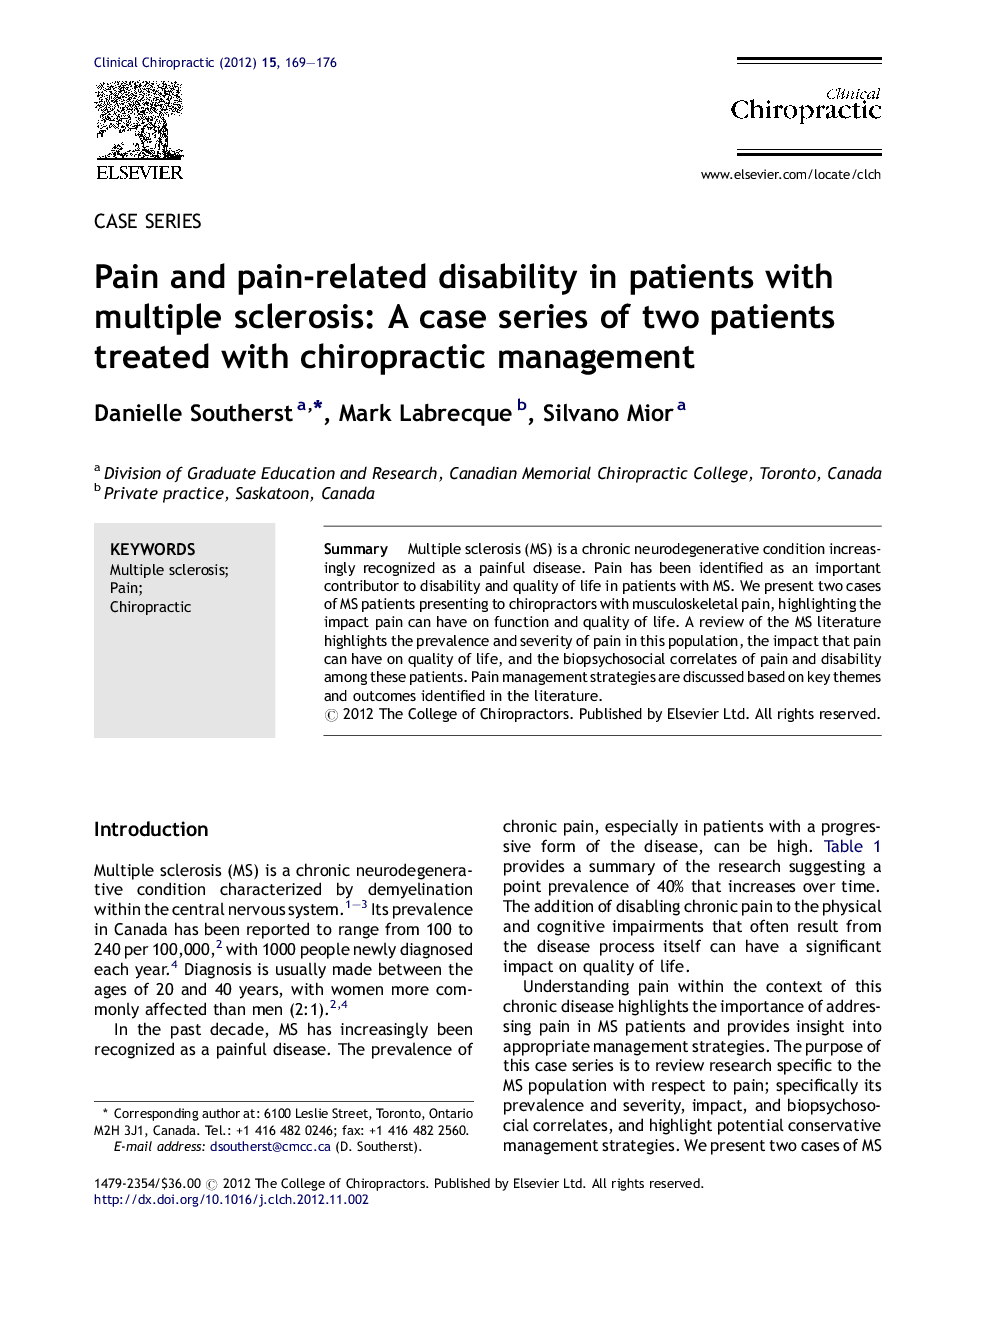 Pain and pain-related disability in patients with multiple sclerosis: A case series of two patients treated with chiropractic management